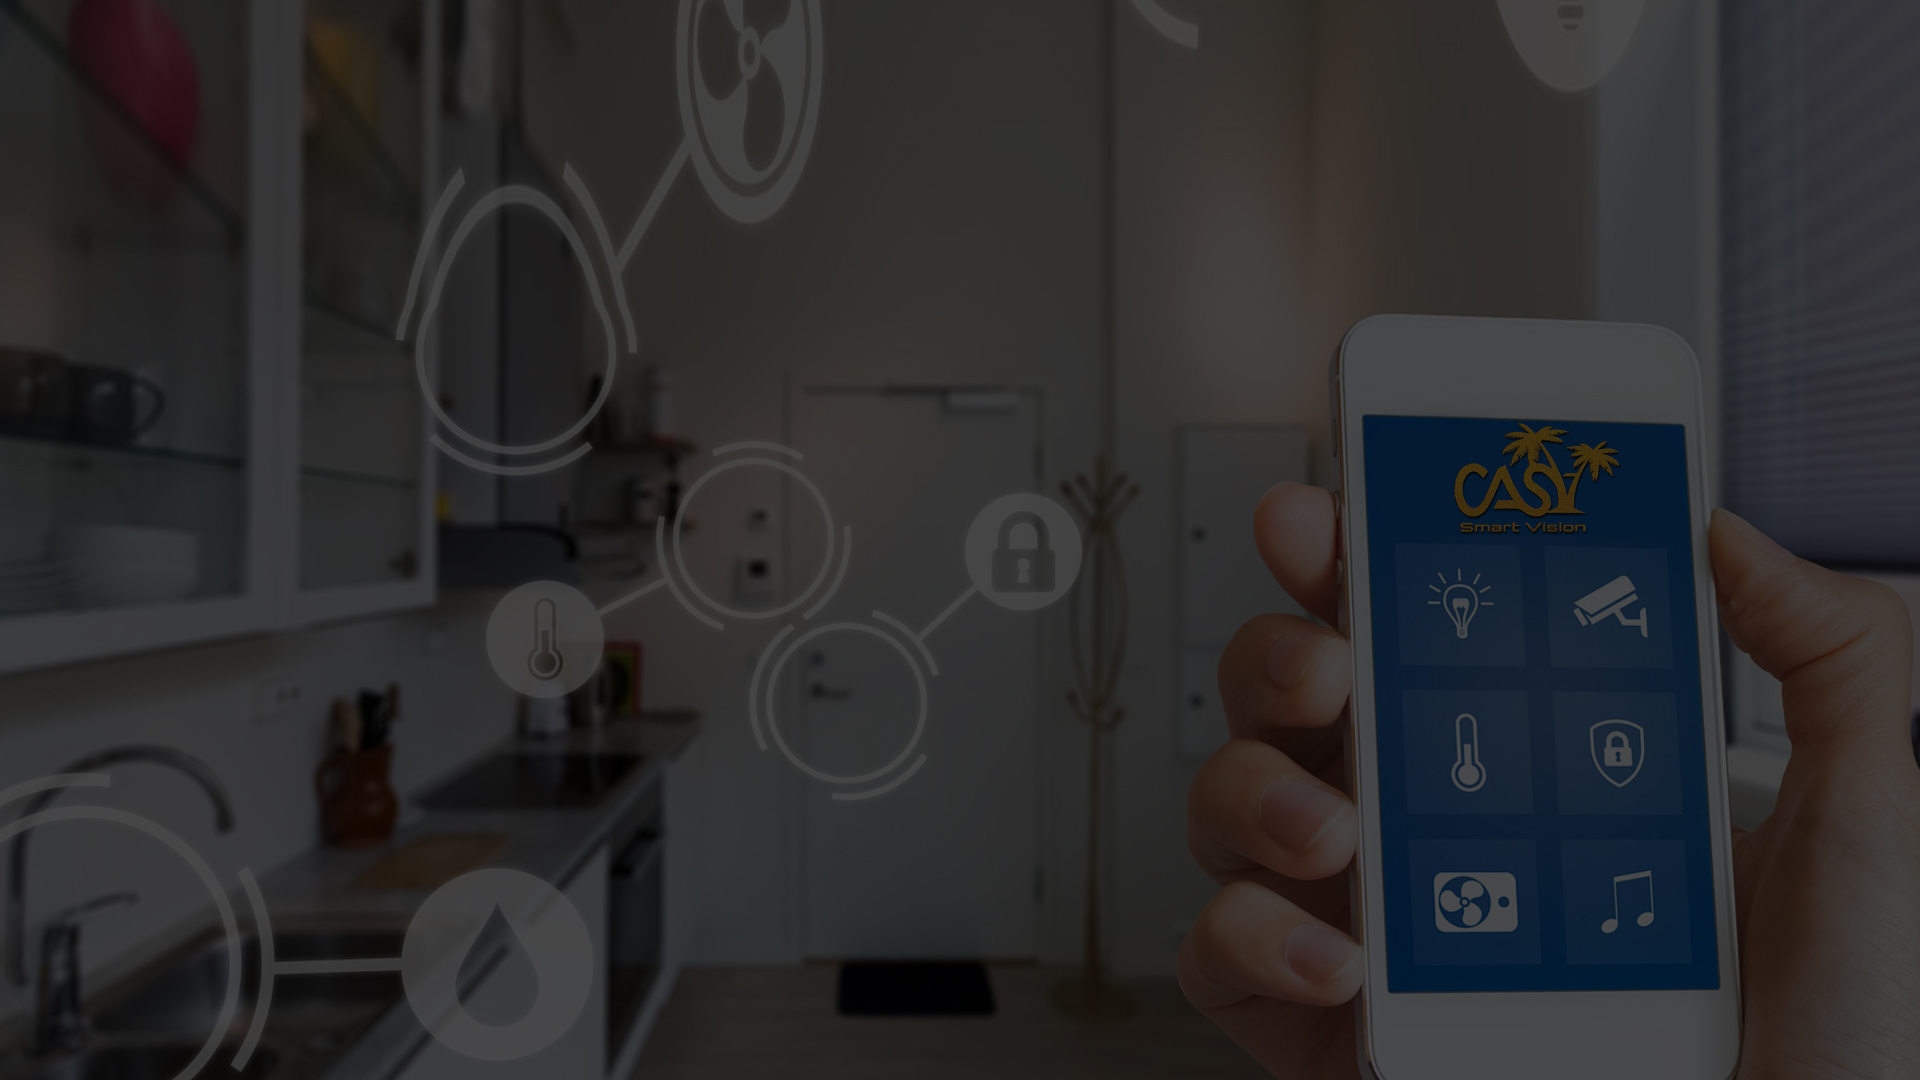 Build a smarter, more thoughtful connected home